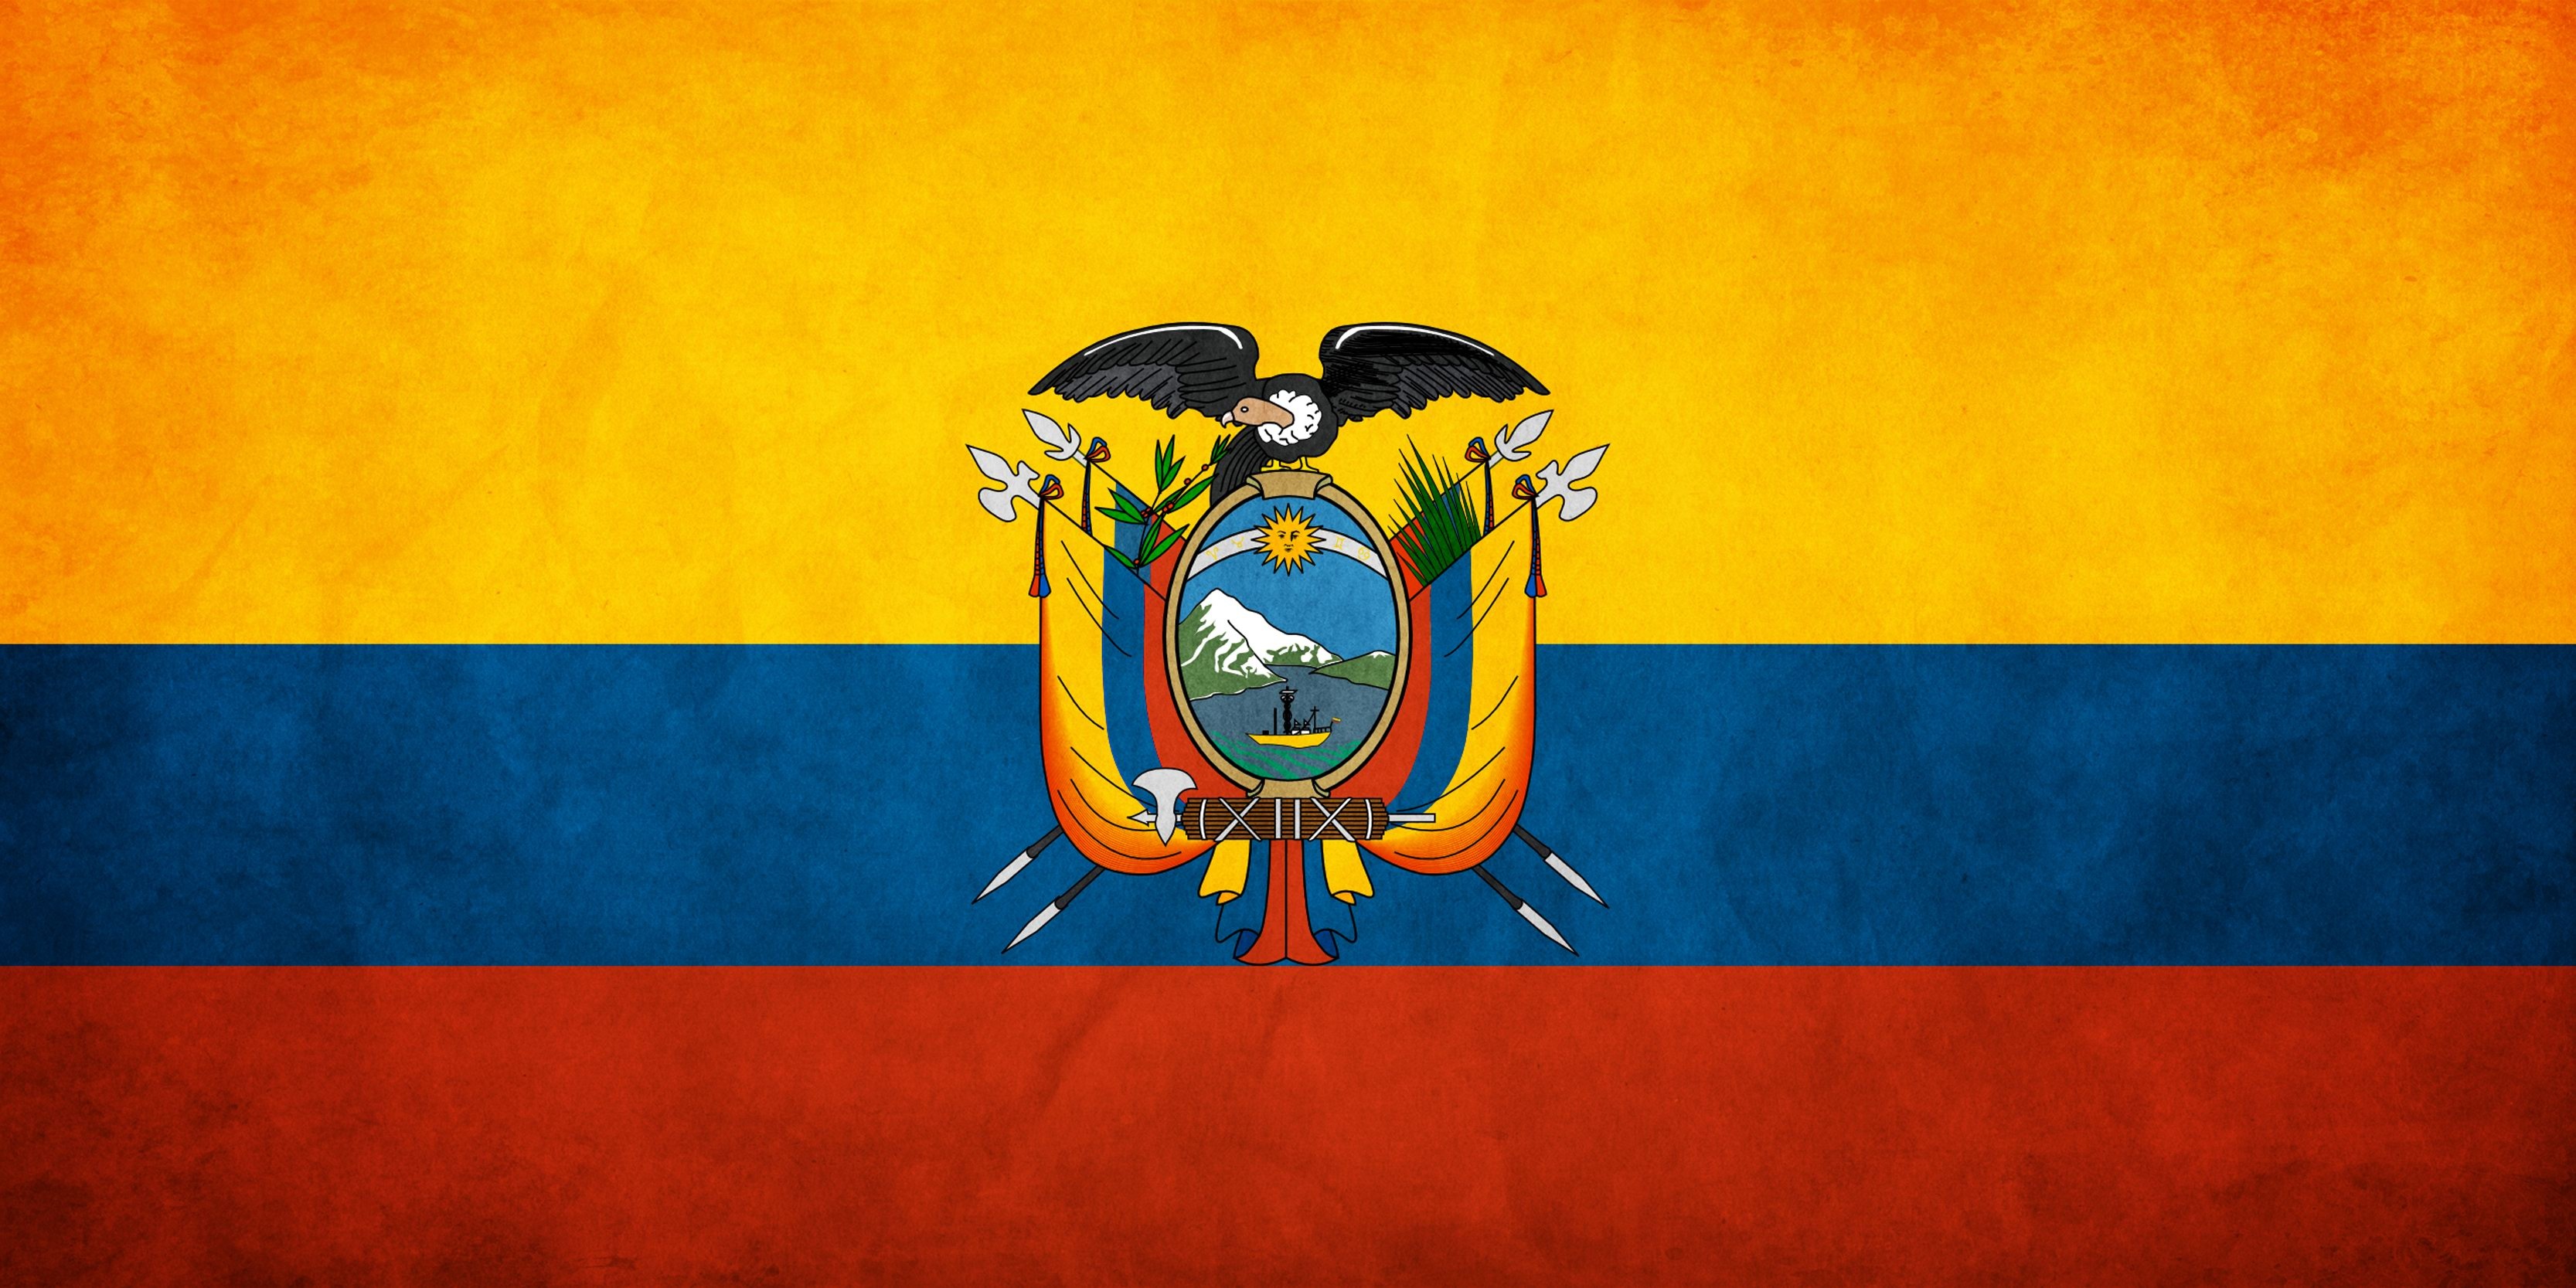 Ecuador: A founding member of the United Nations, Organization of American States, Mercosur, PROSUR, and the Non-Aligned Movement. 3340x1670 Dual Screen Wallpaper.